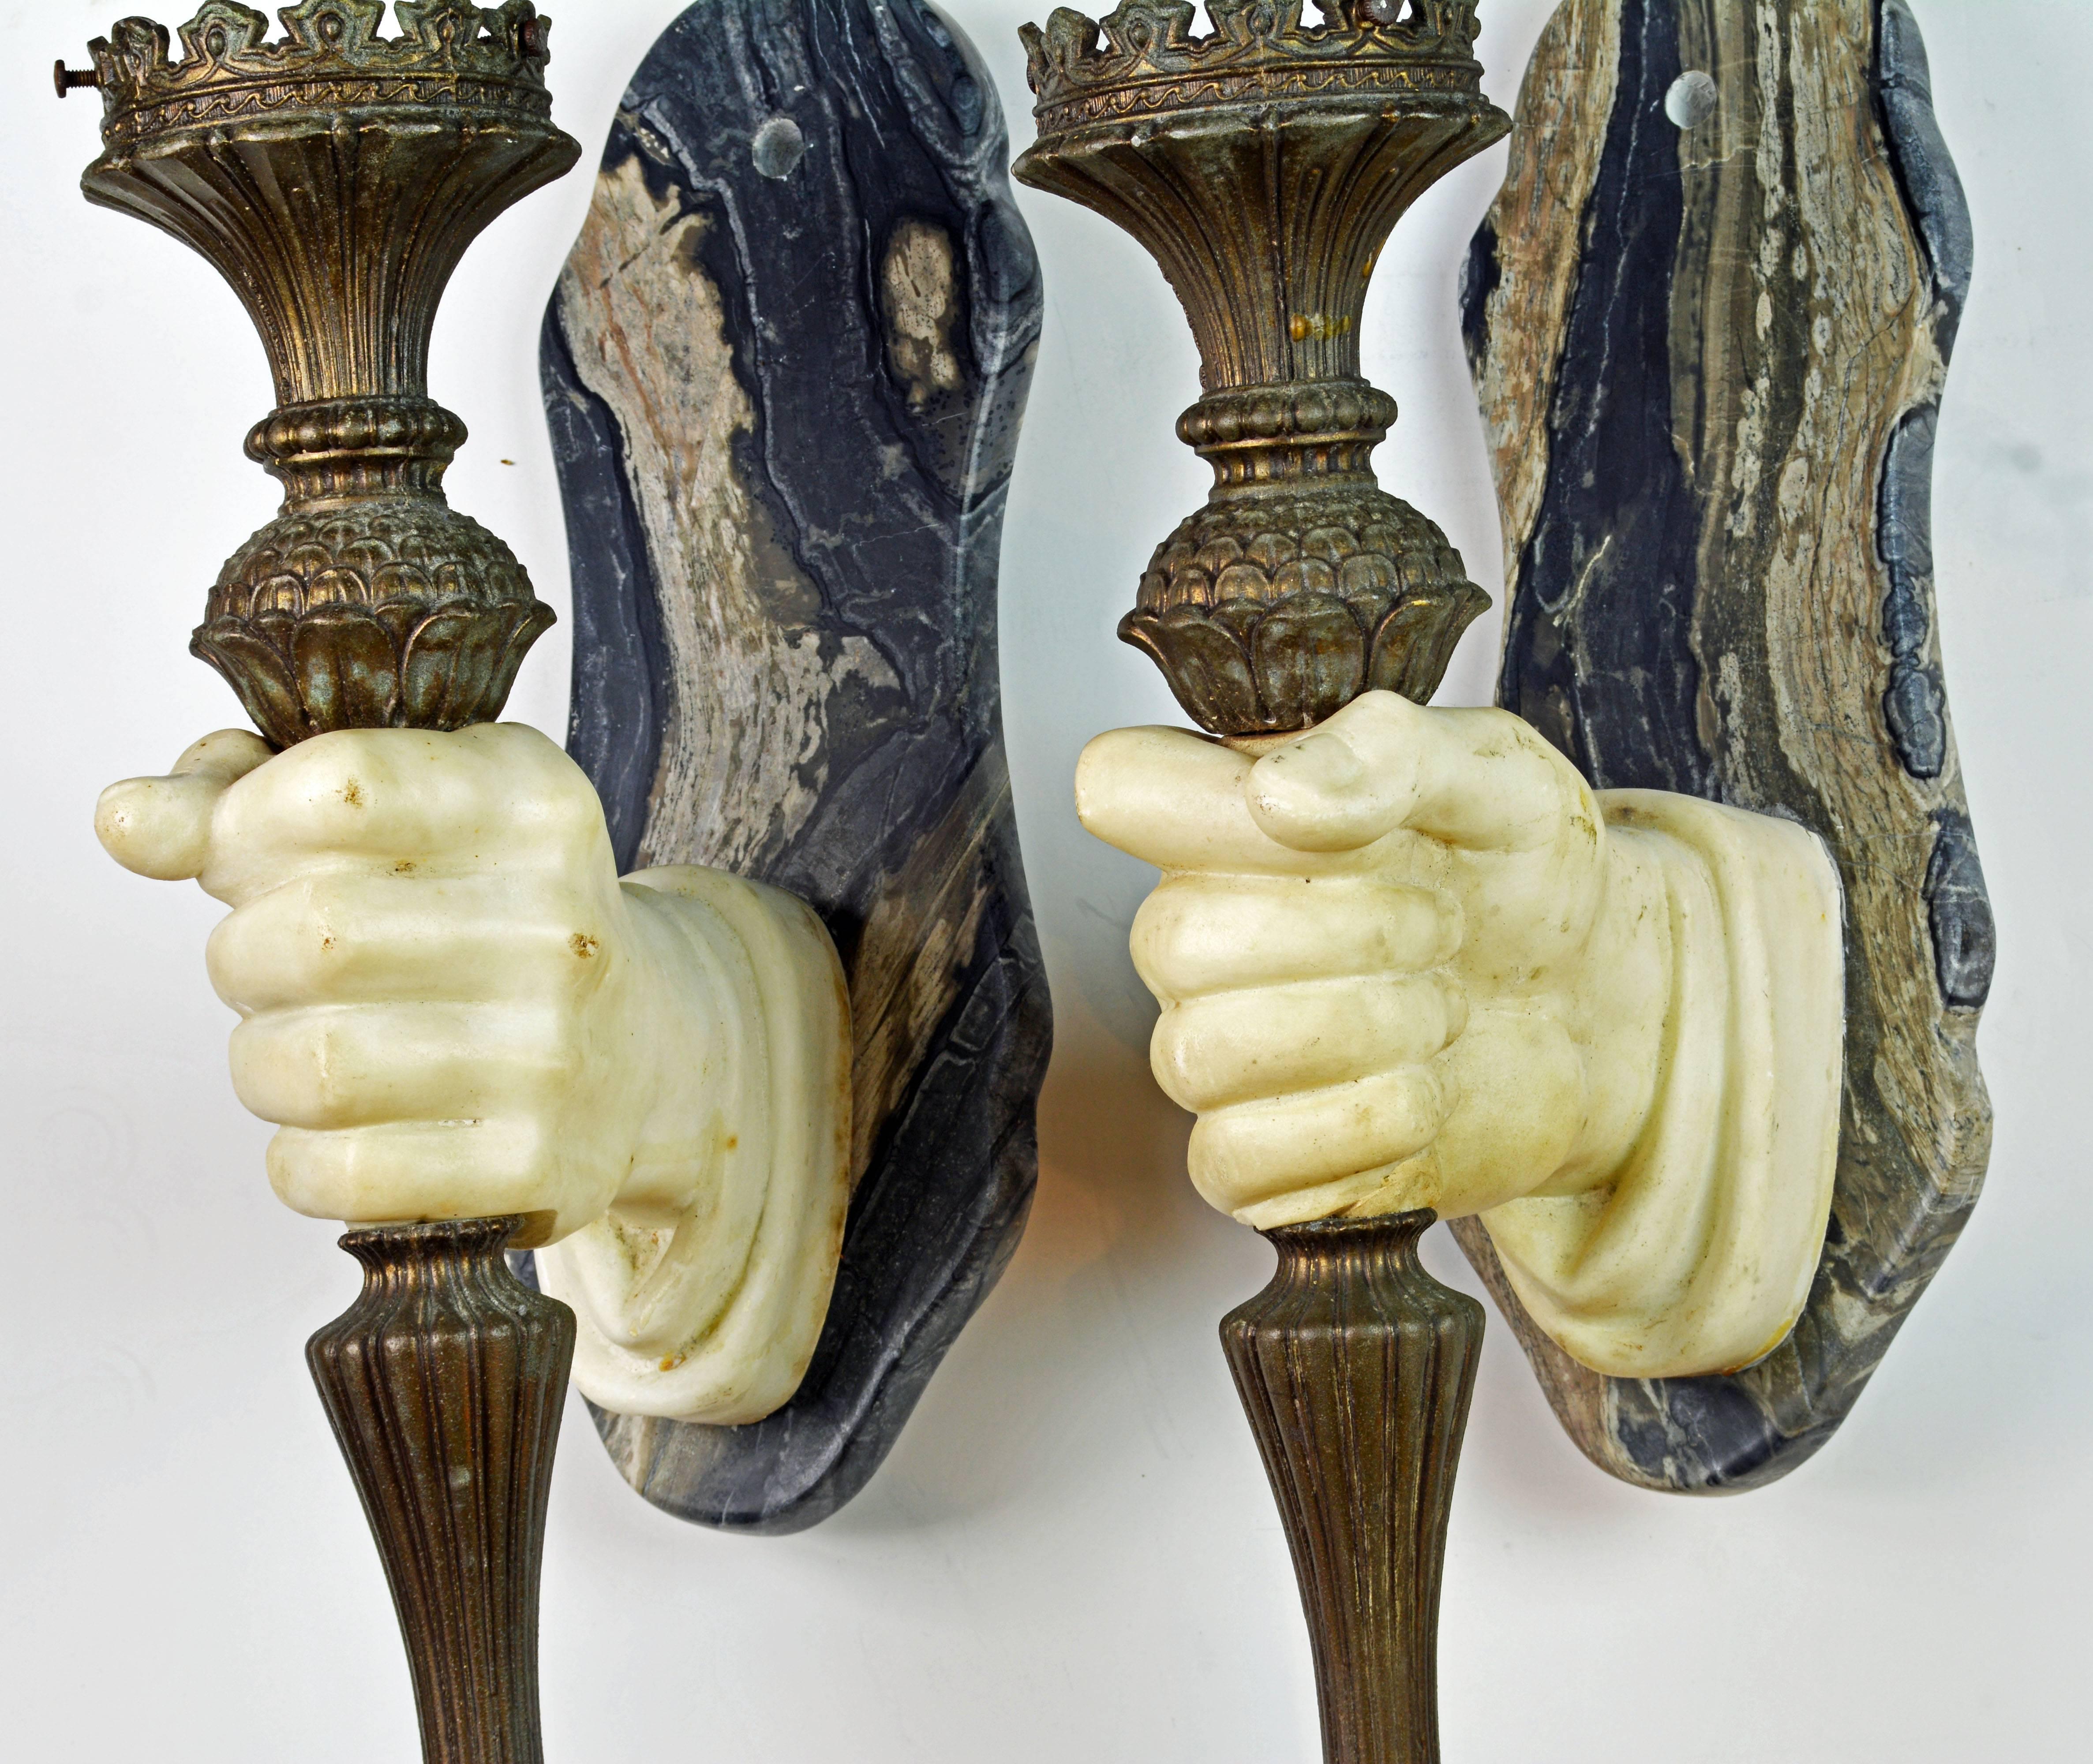 This opposing pair of wall sconces has likely originally been wired for glass globes, see photos. The consist of a marble backplate, one of which has been almost invisible repaired, and two well carved marble hands holding richly decorated patinated